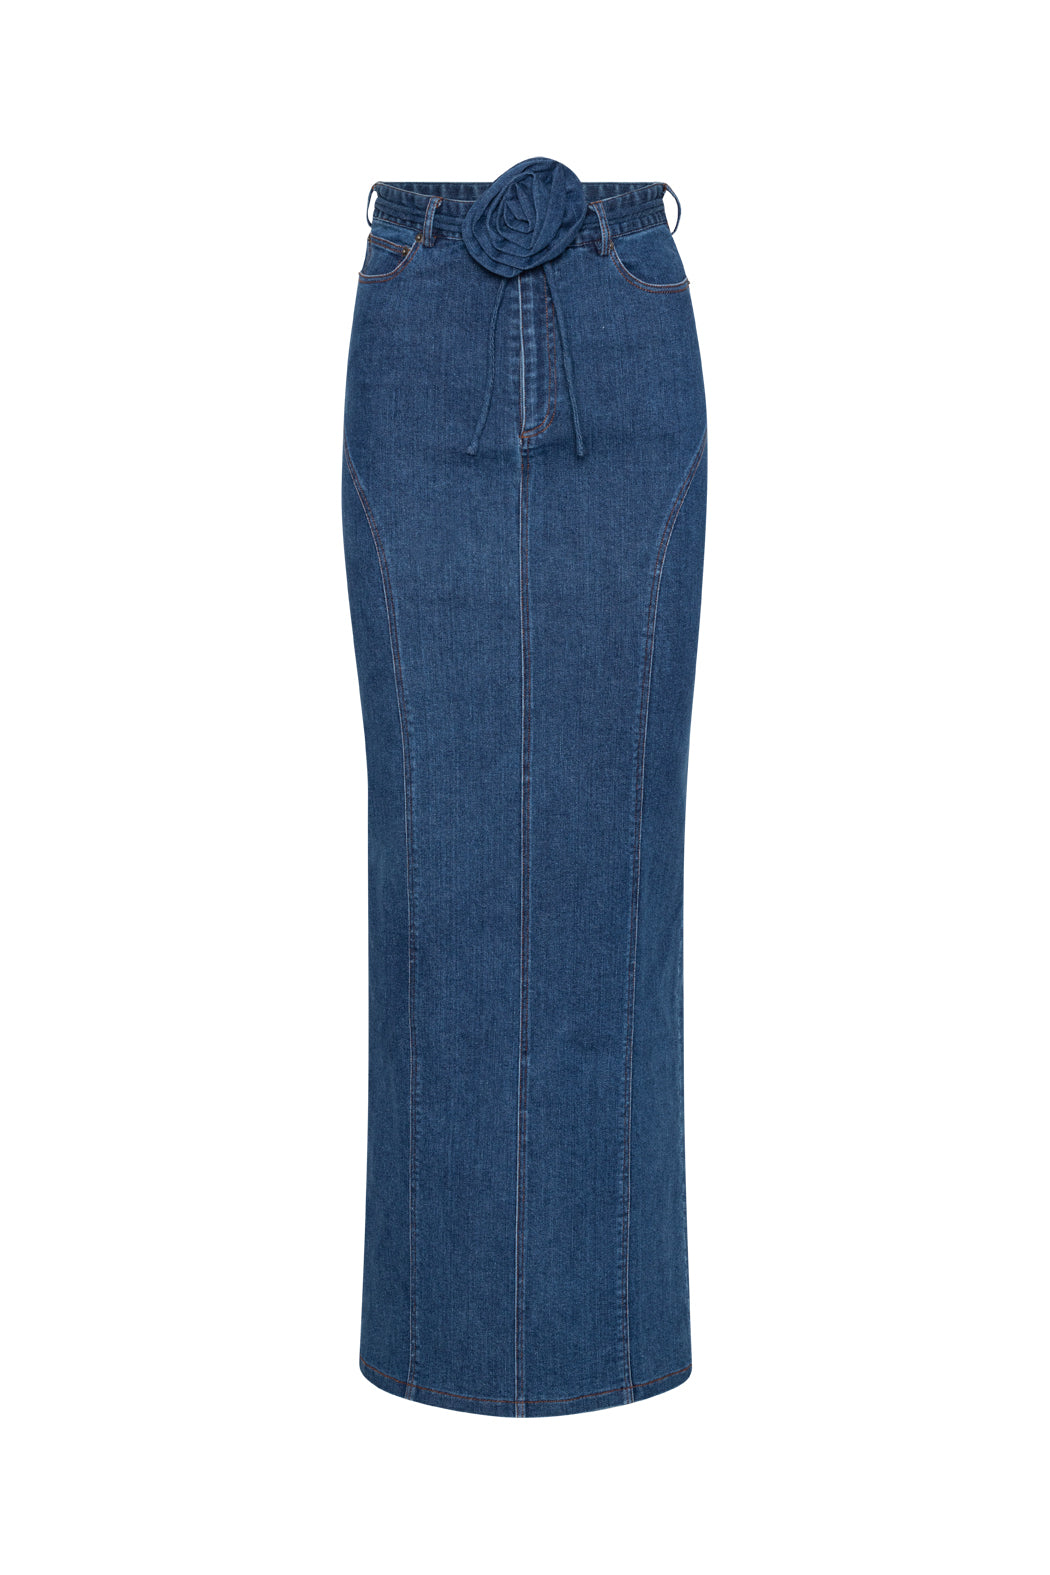 Stretchy Maxi Skirt - Orion Blue